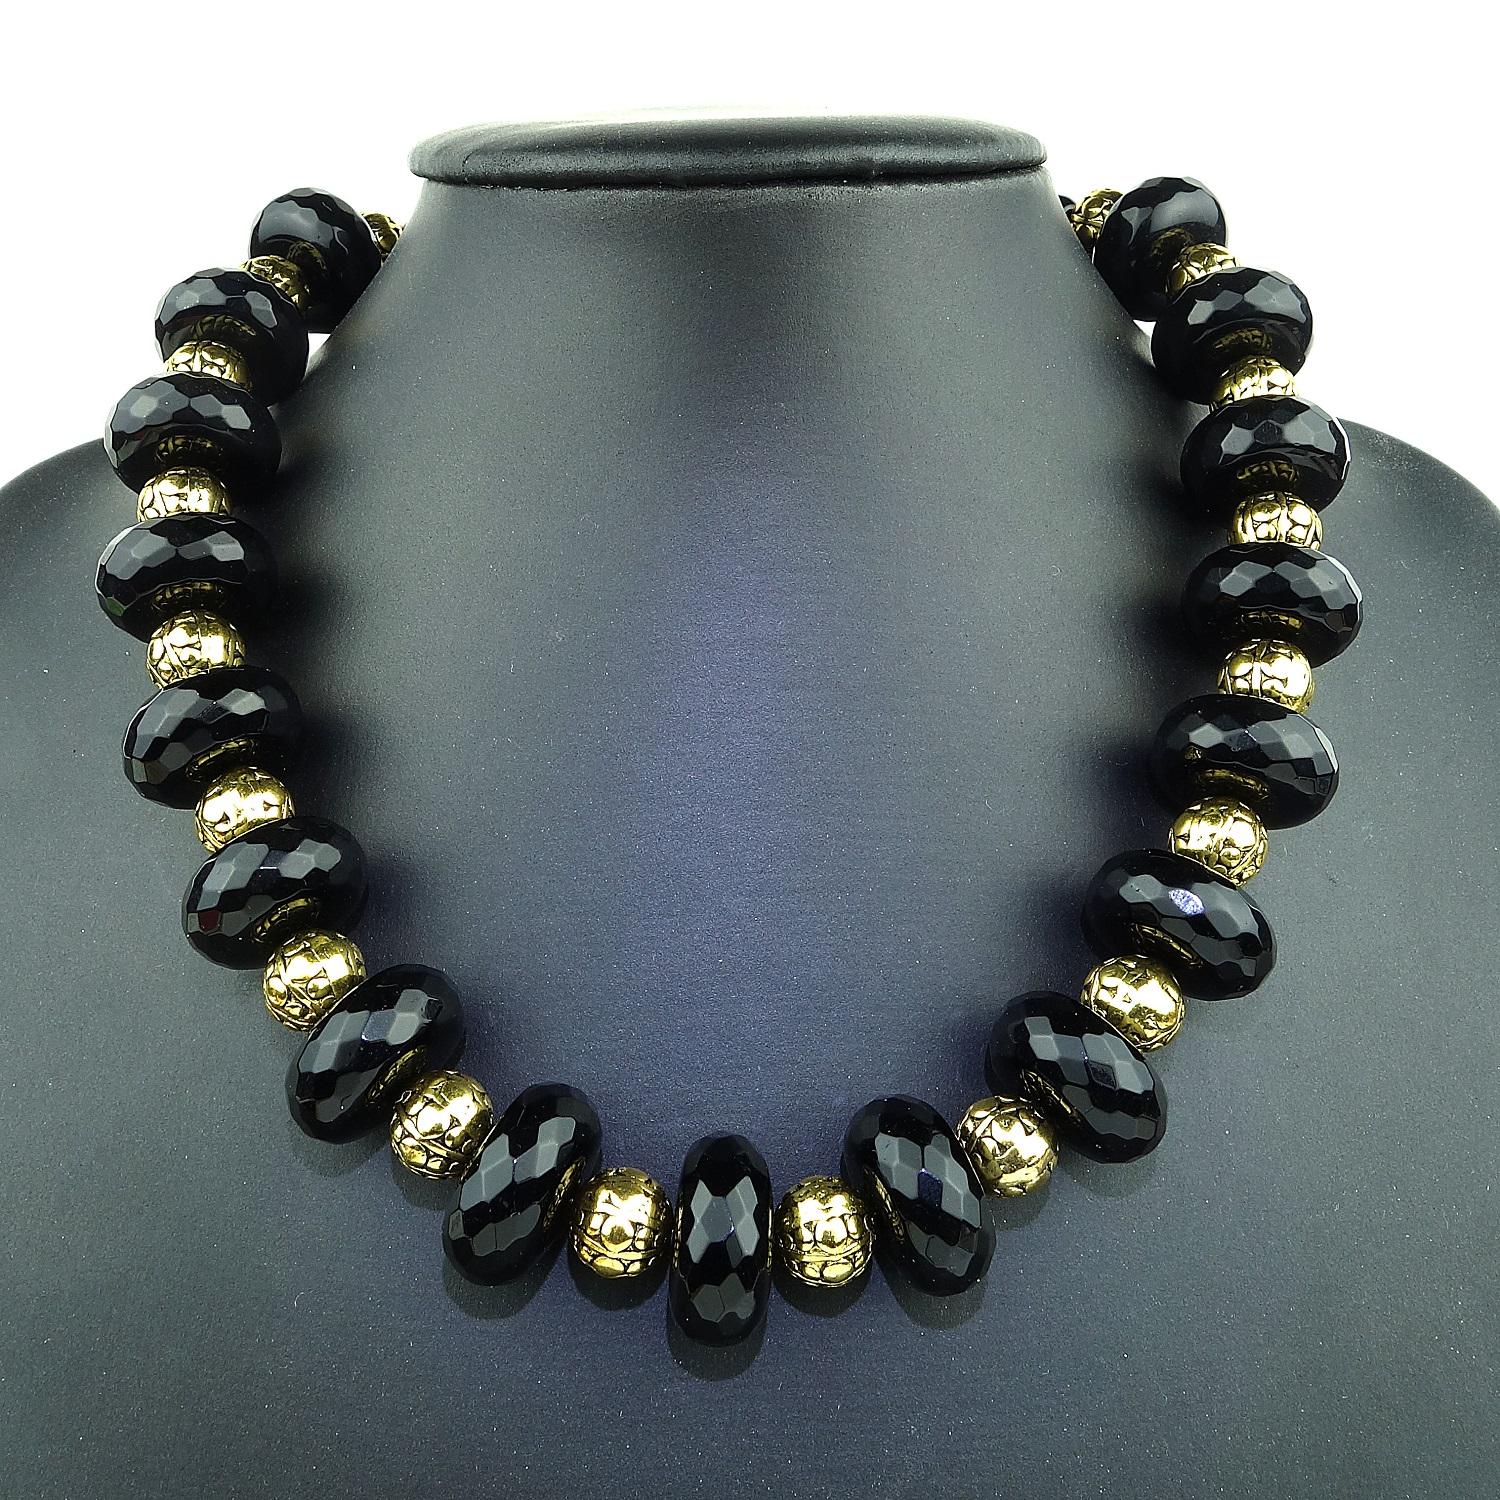 Contemporary AJD Statement Black Onyx and Brass Necklace